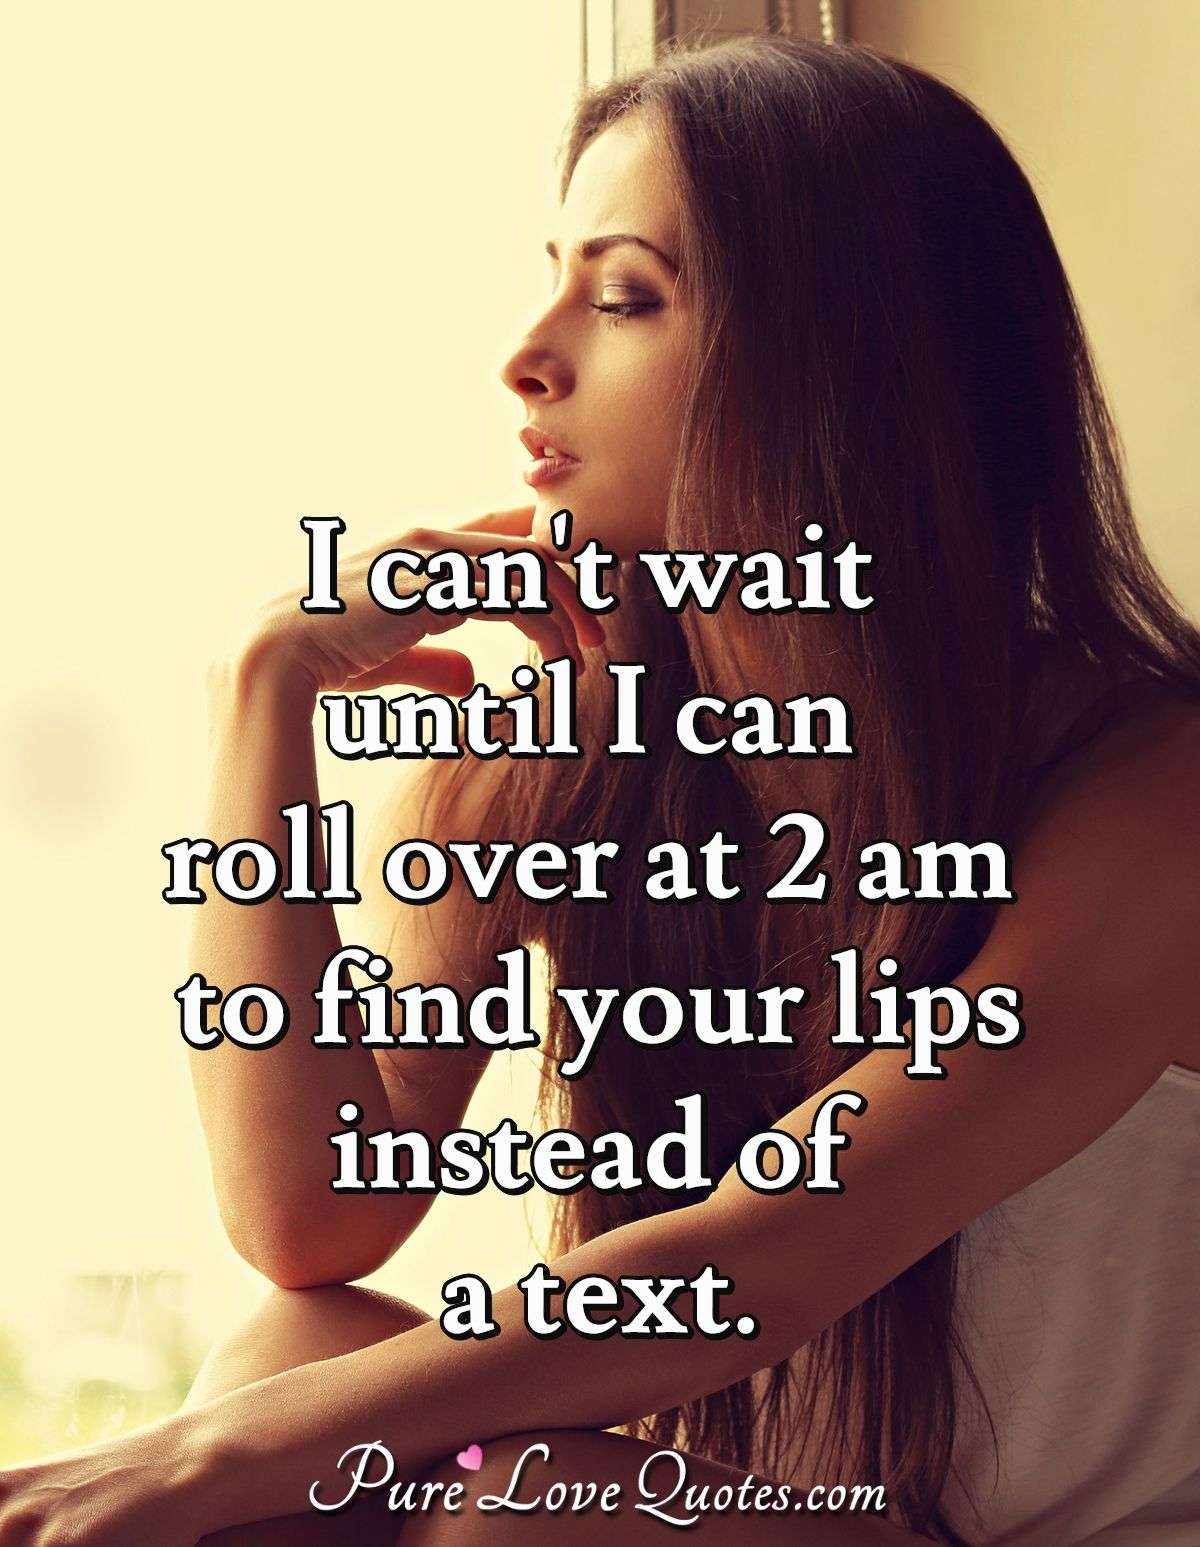 I Can T Wait Until I Can Roll Over At 2 Am To Find Your Lips Instead Of A Text Purelovequotes